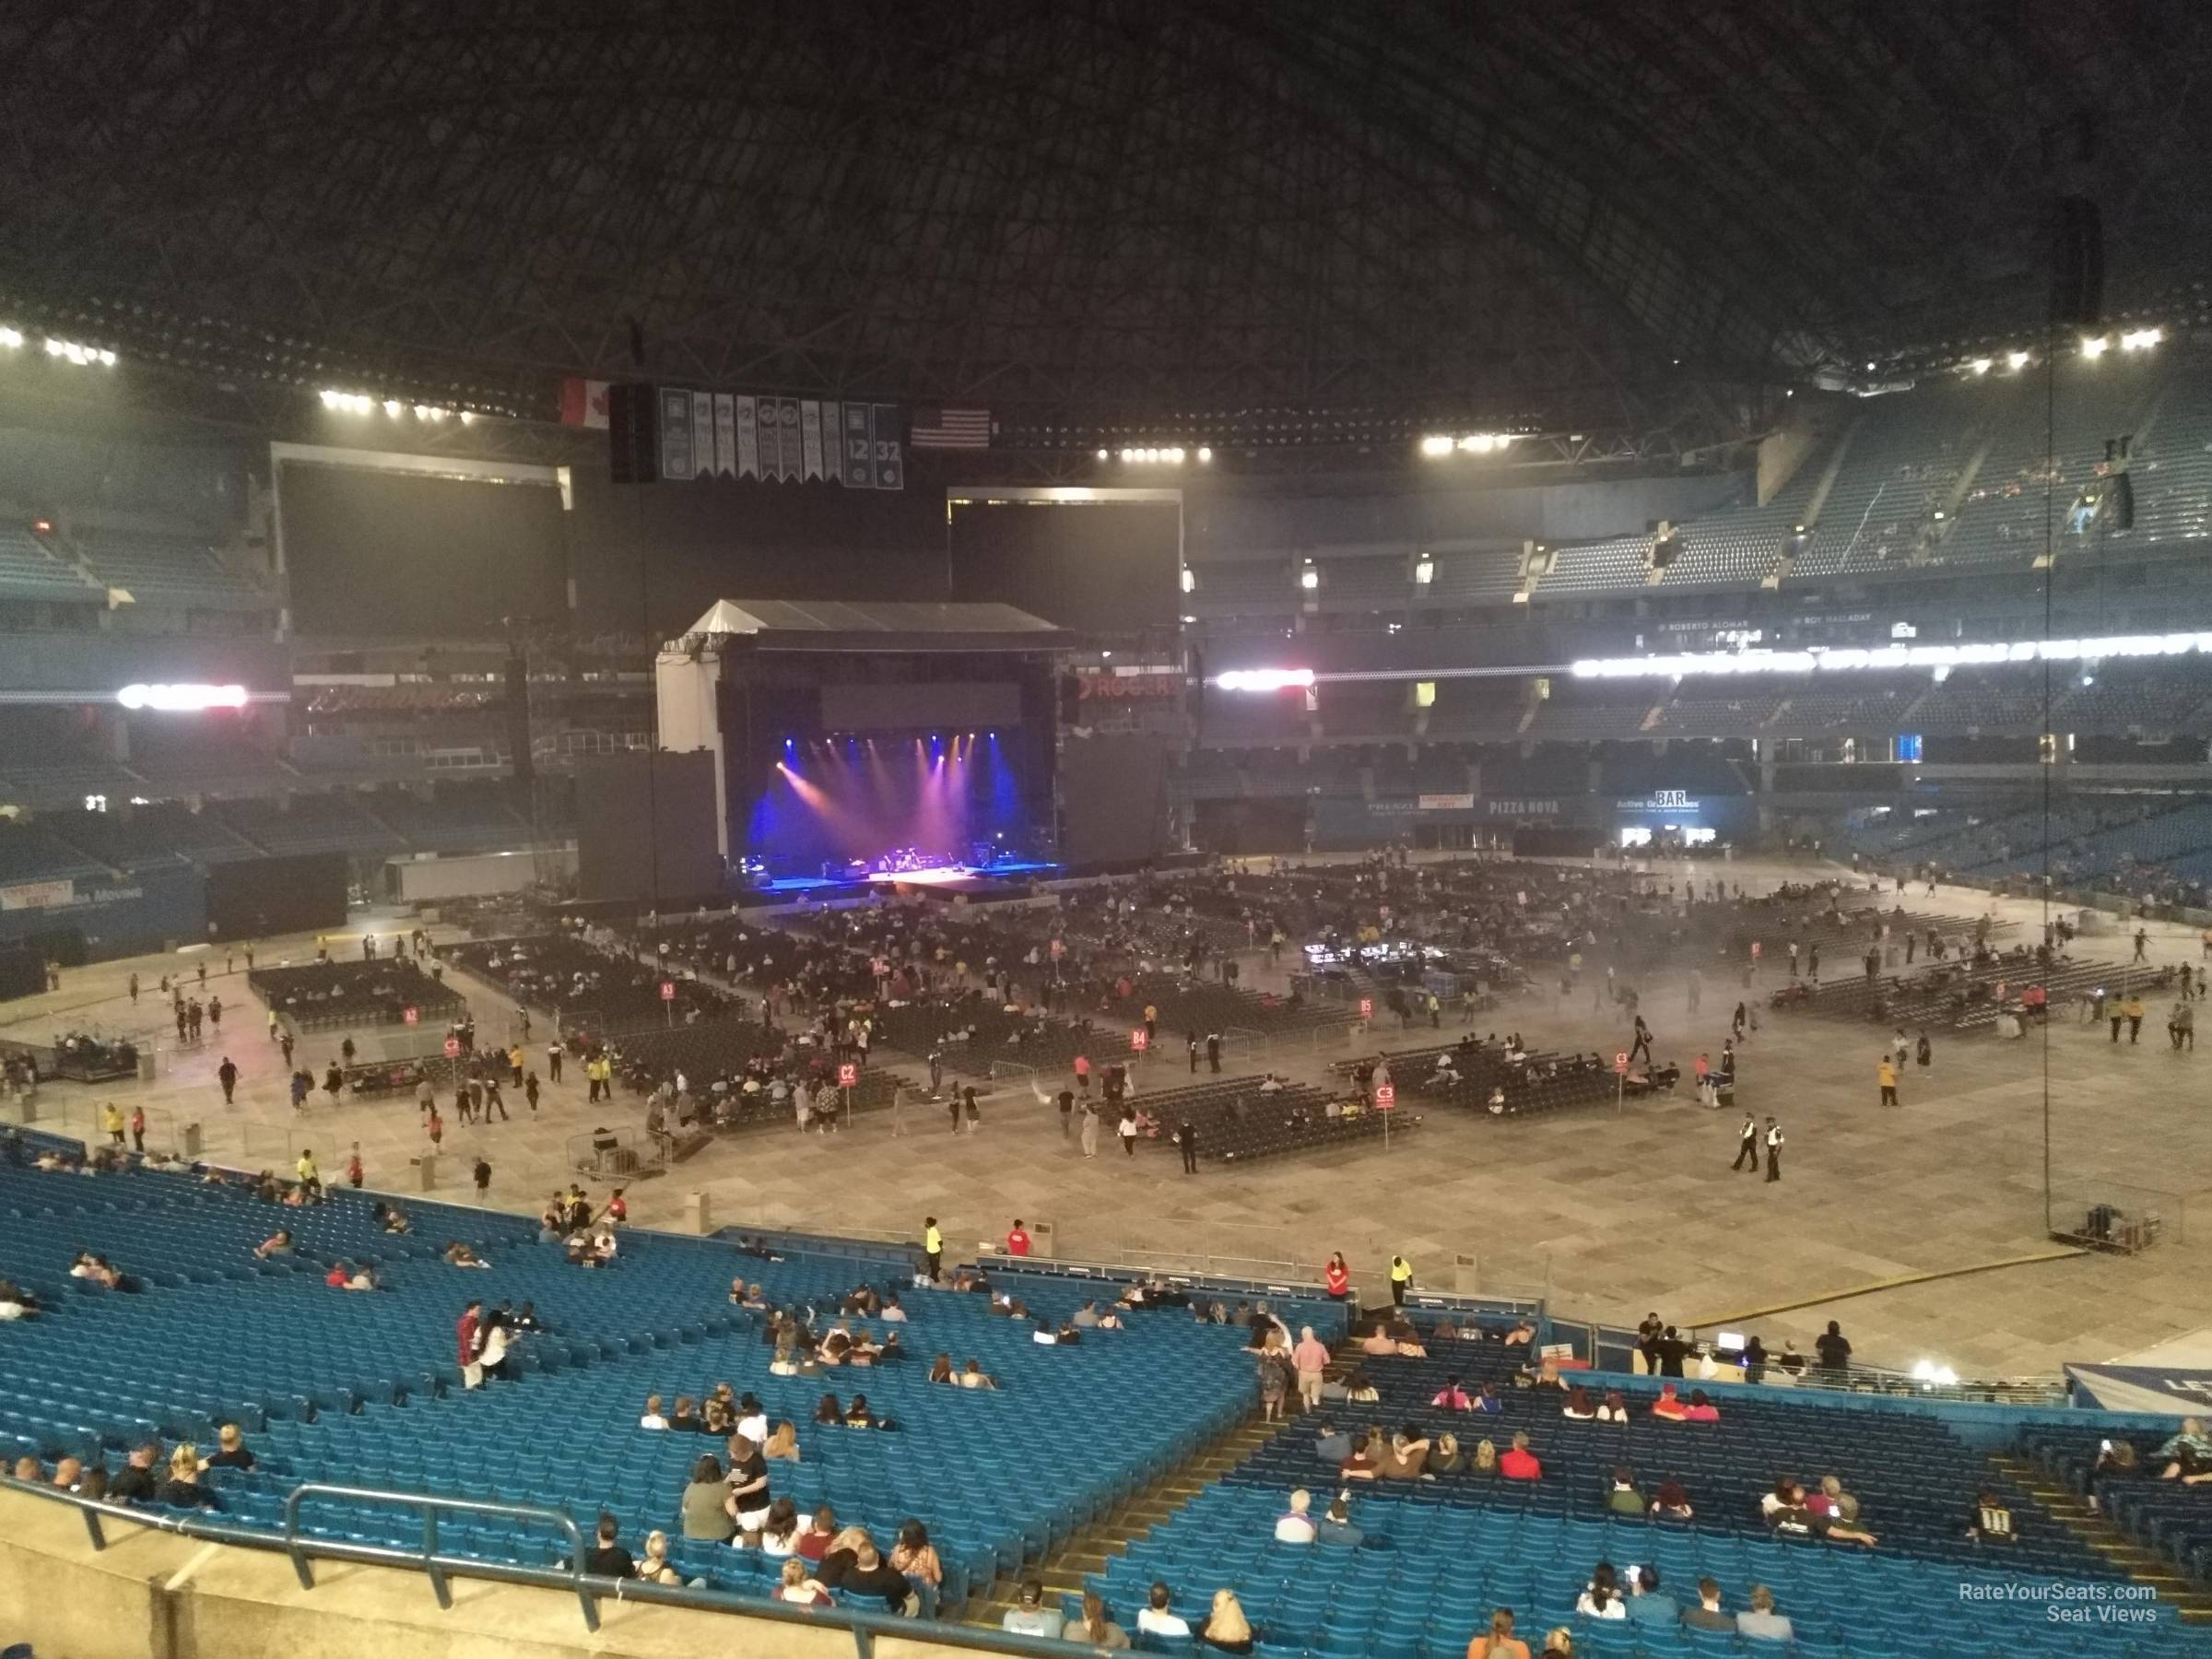 section 230, row 7 seat view  for concert - rogers centre